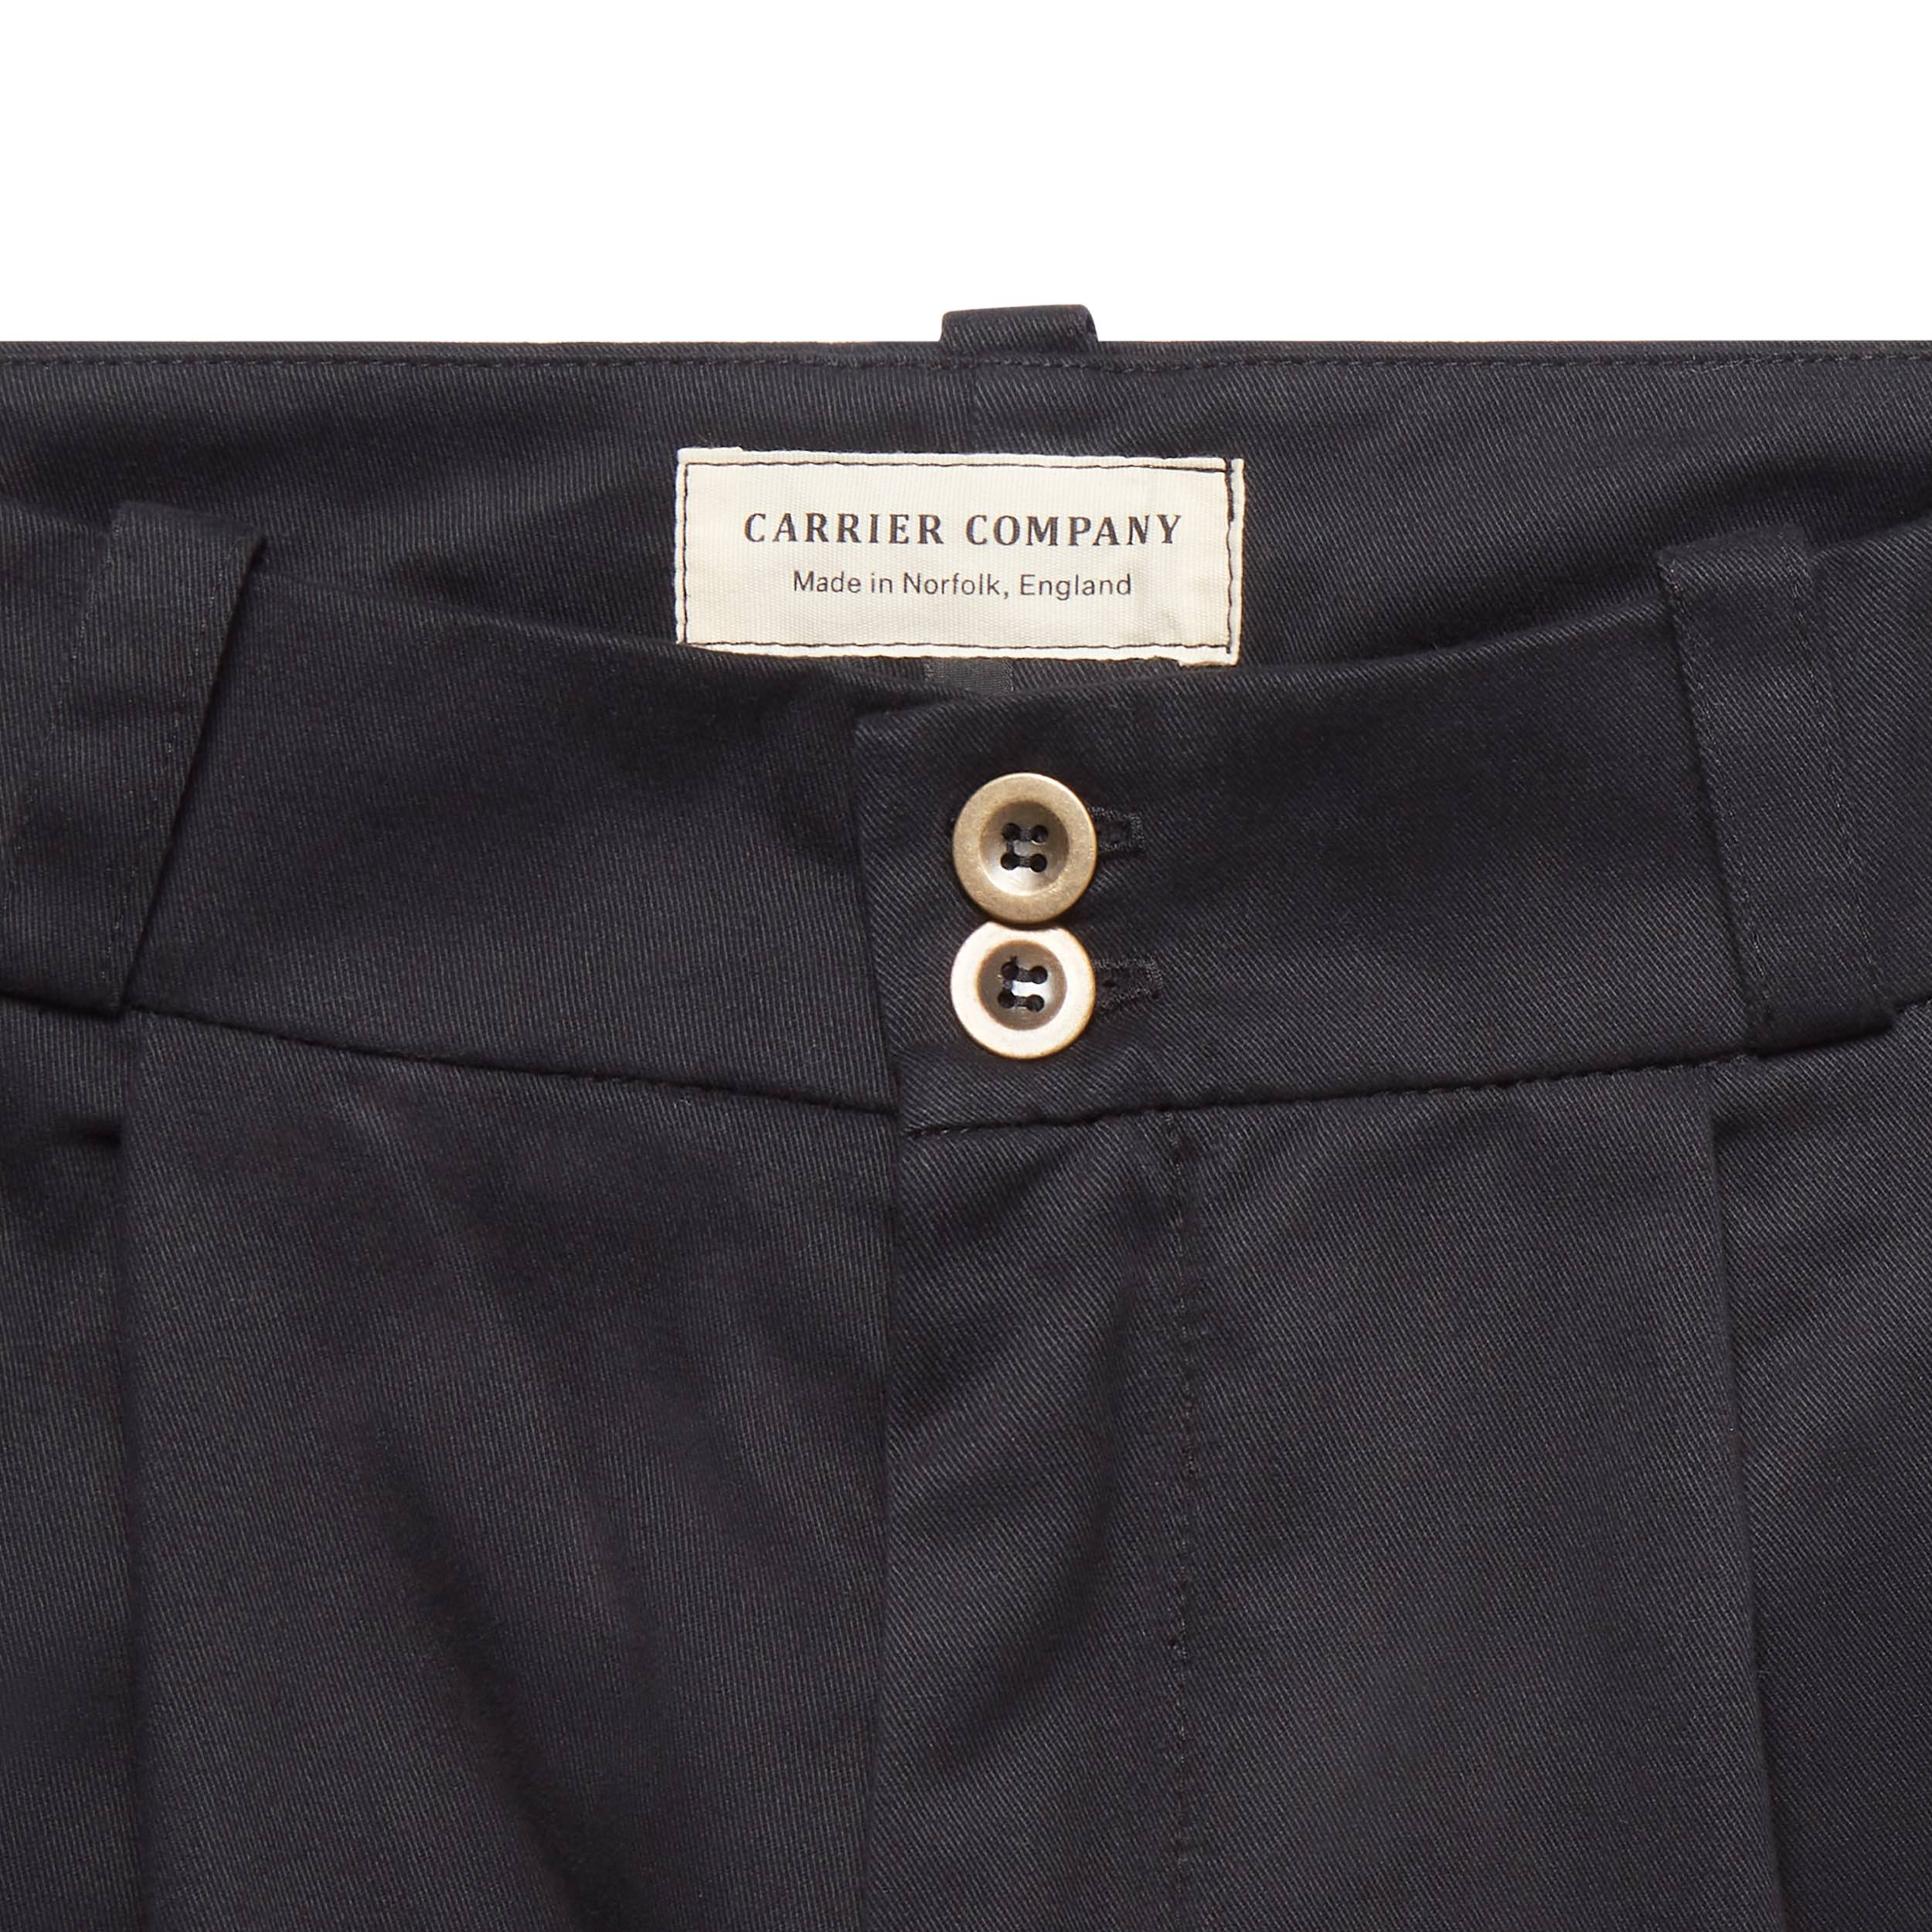 Carrier Company Dutch trouser In Black Cotton Drill